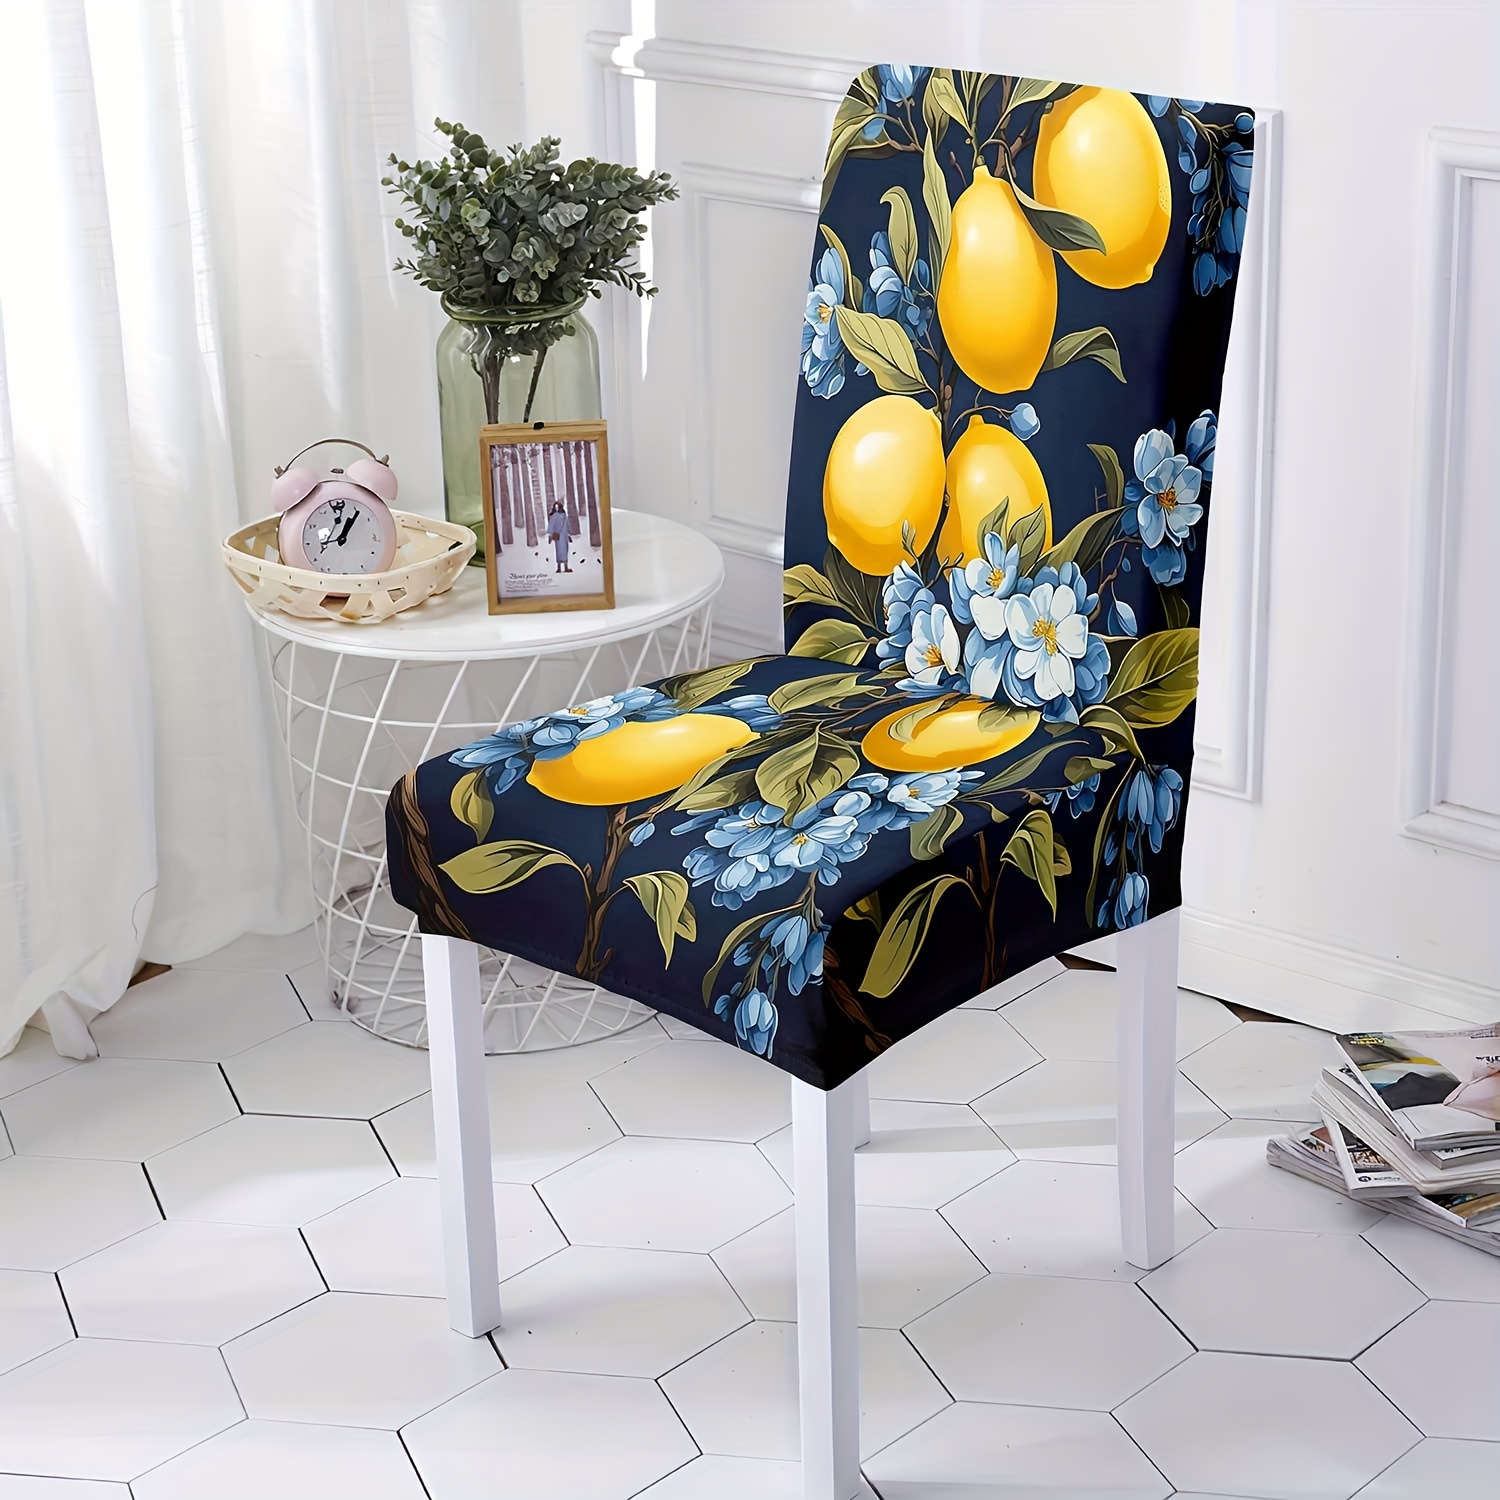 

4/6pcs Lemon Pattern Chair Slipcovers, Stretch Dining Chair Cover, Furniture Protective Cover, For Dining Room Living Room Office Home Decor